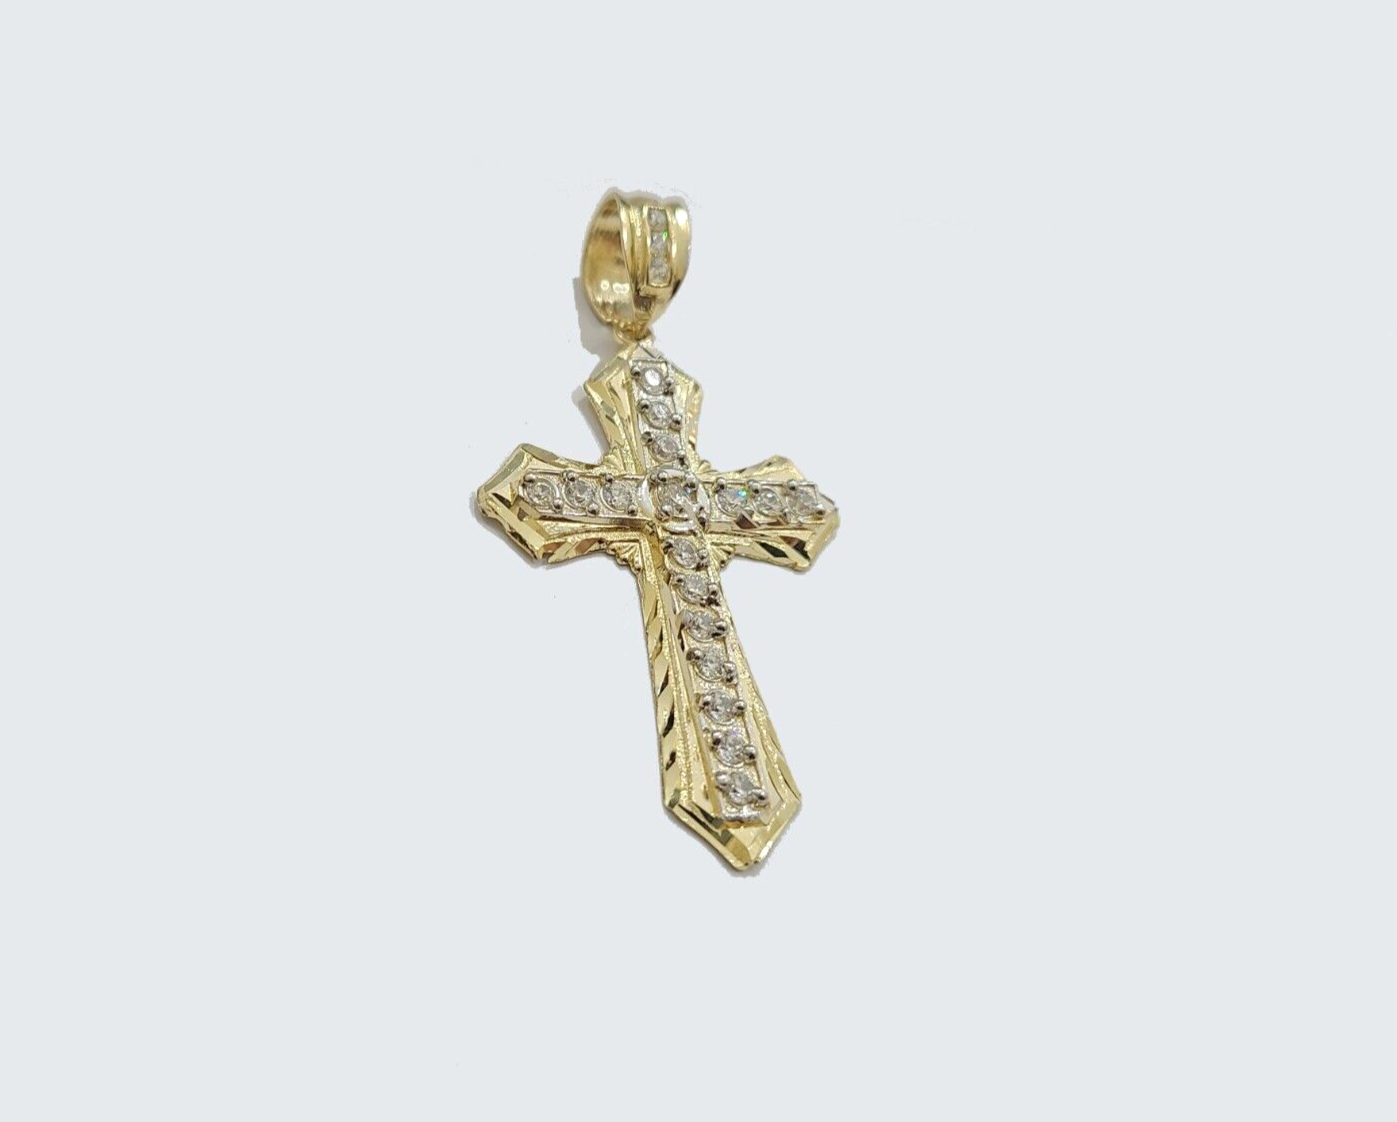 Real 10k Gold Jesus Crucifix Cross Pendant Charm 10kt Yellow 2'' Inch For Chain